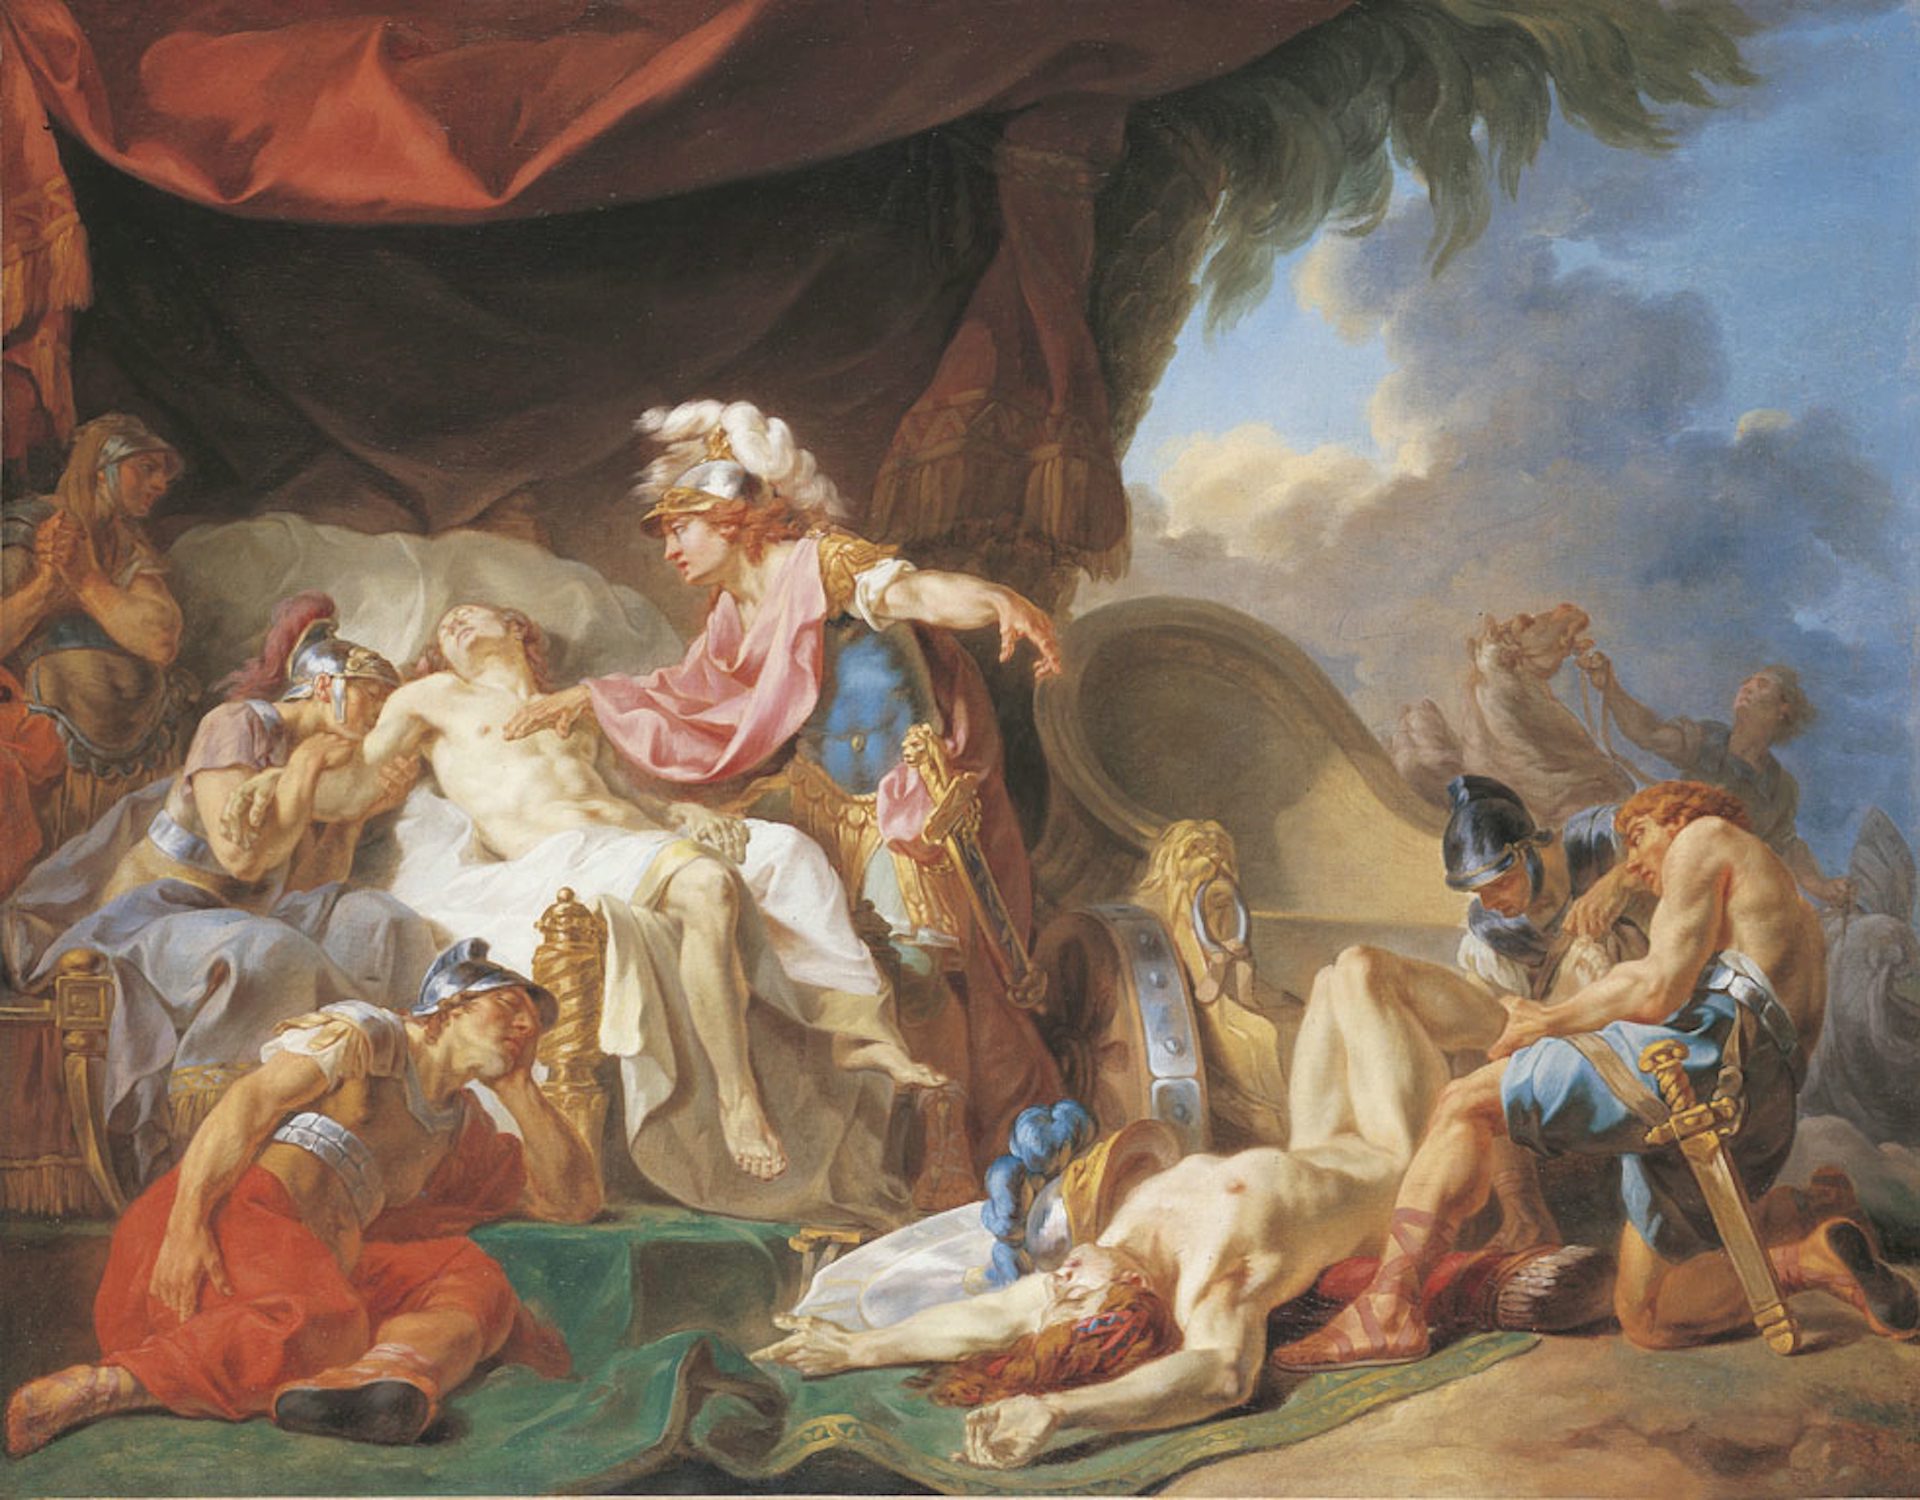 Achilles Displaying the Body of Hector at the Feet of Patroclus by Joseph-Barthélemy Lebouteux